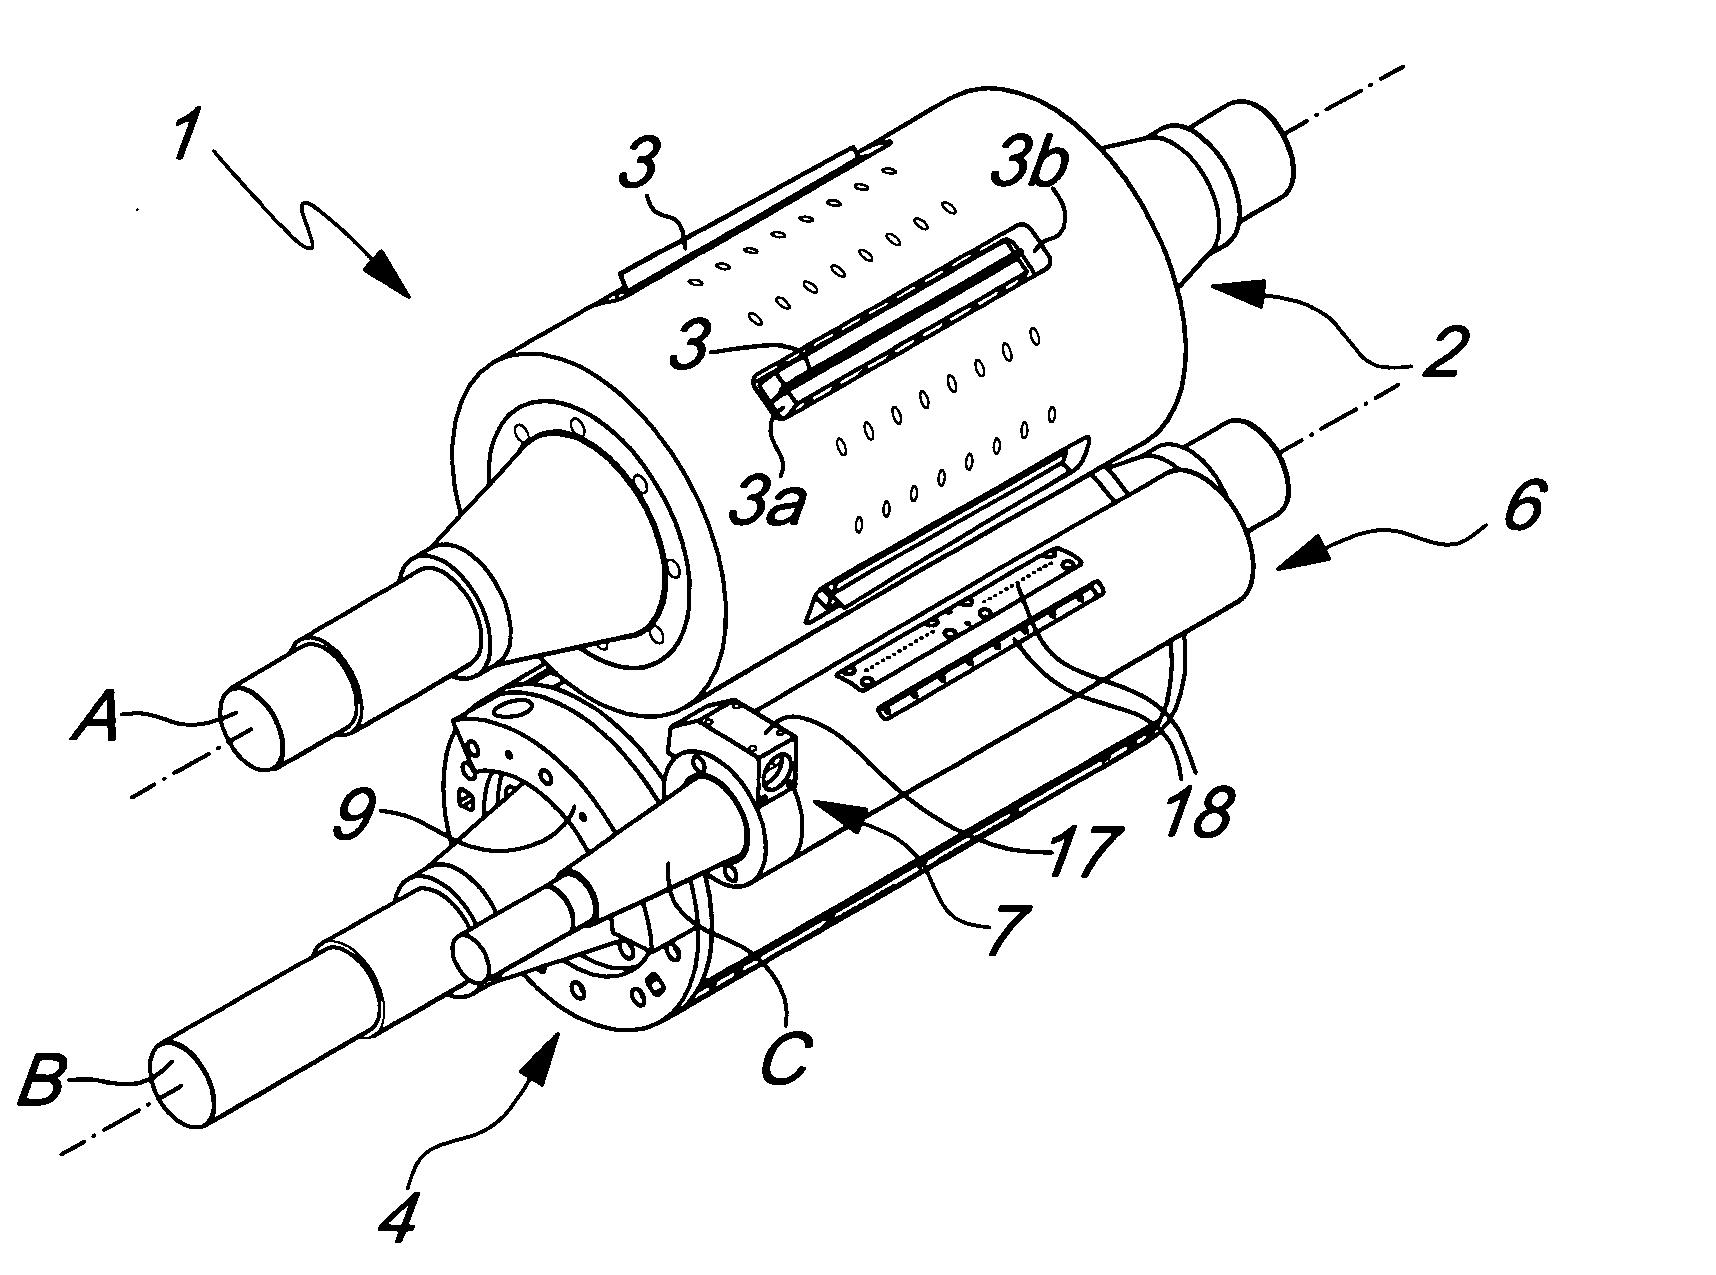 Cutting and folding assembly for products such as  tissues, napkins and the like